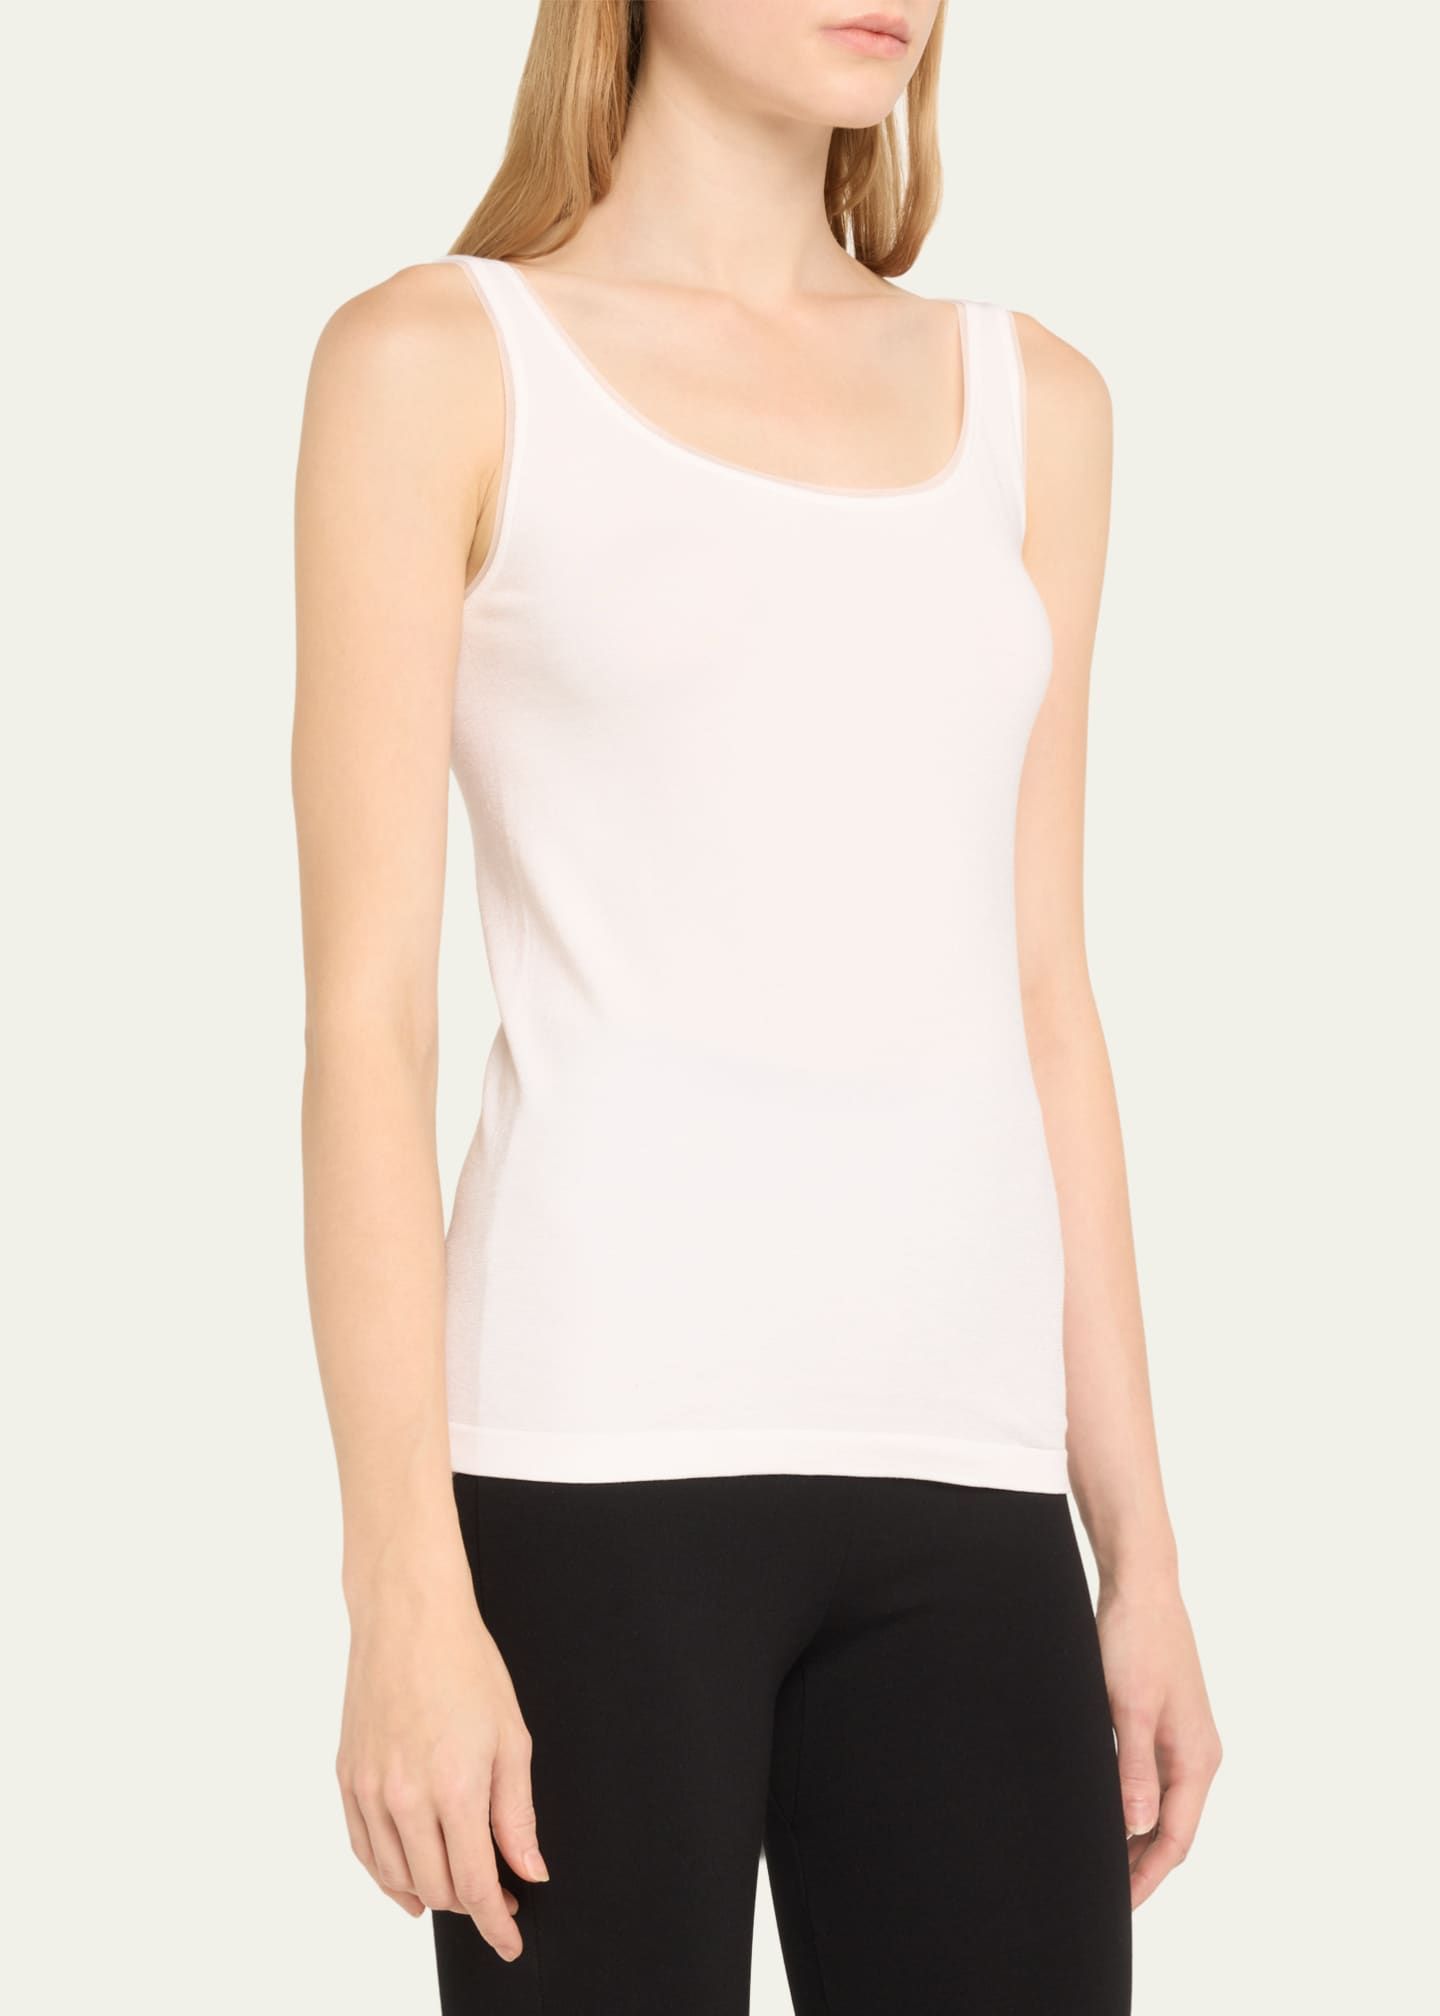 Wolford Ladies Jamaika Sleeveless Top ICY MINT XS SMALL AND MEDIUM  AVAILABLE